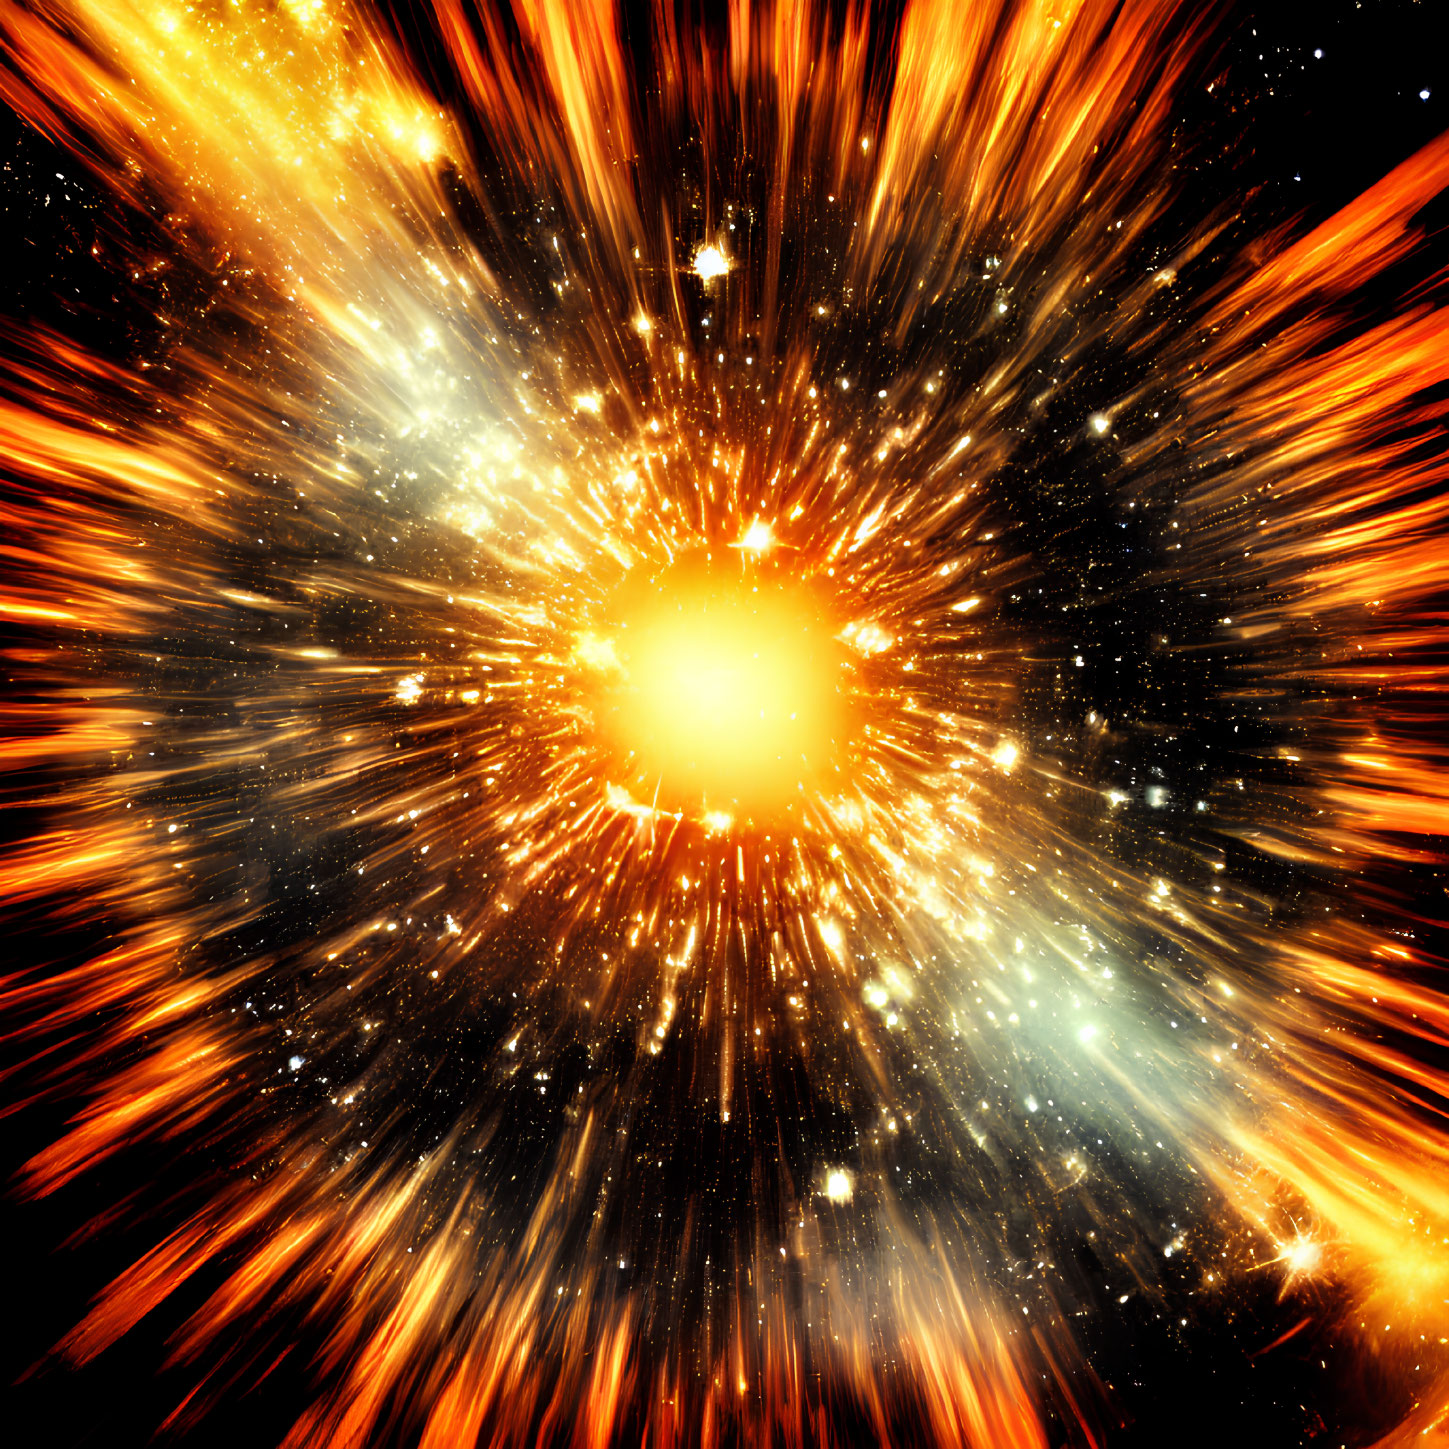 Colorful cosmic artwork: star explosion with fiery particles